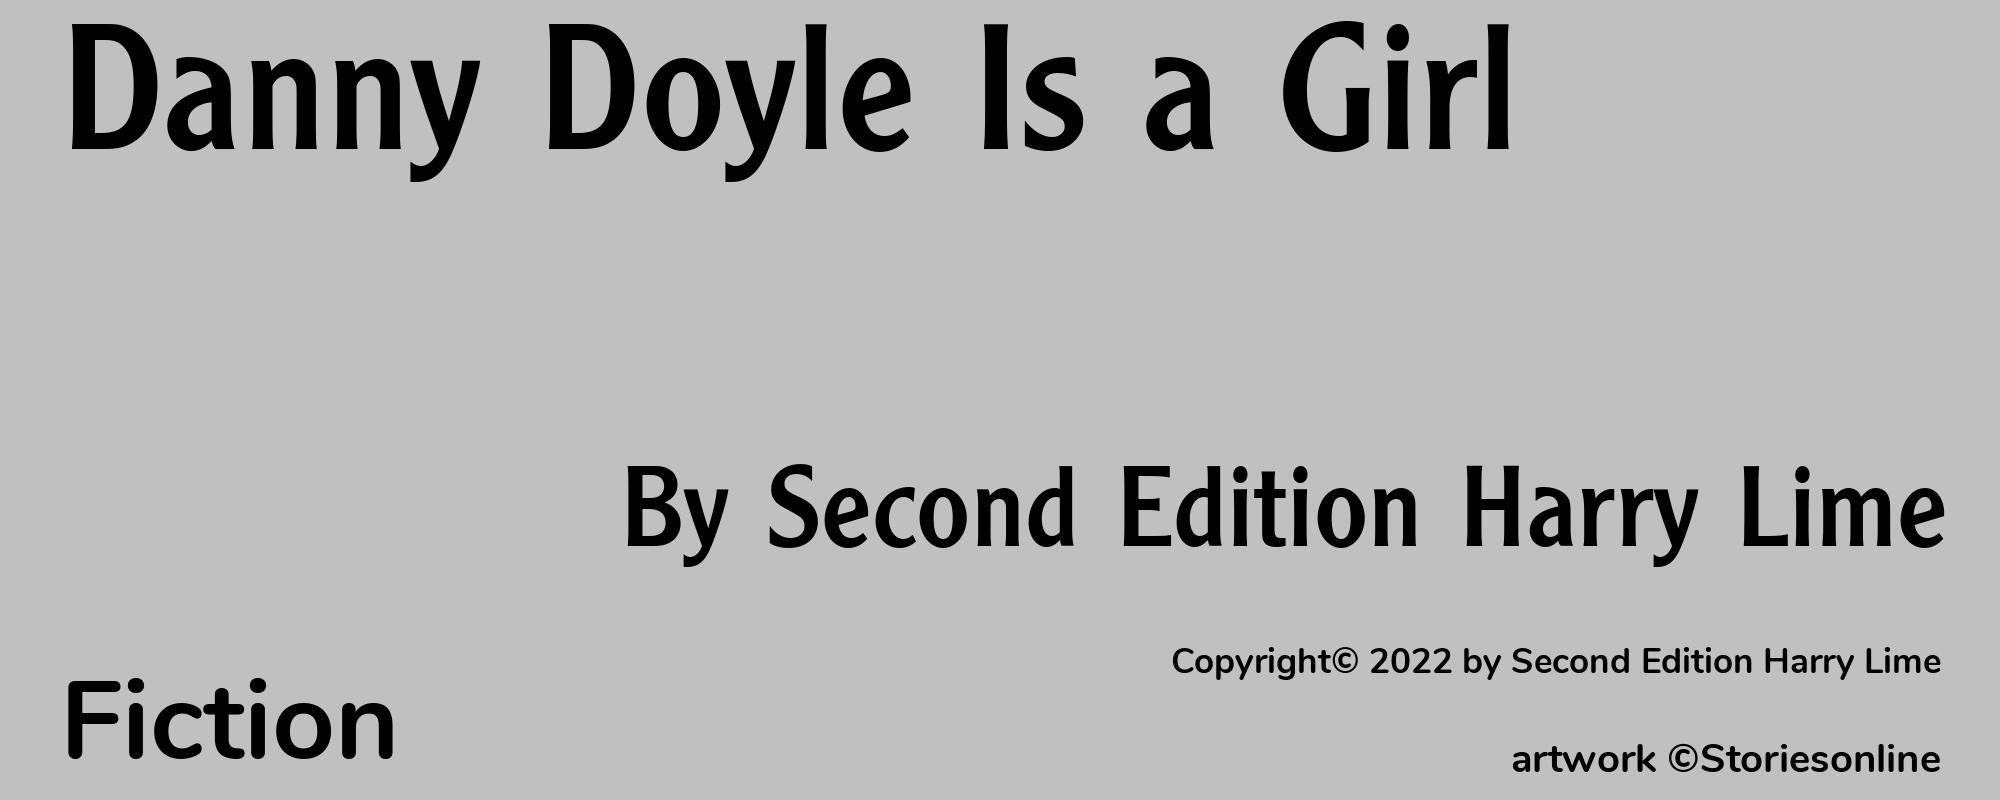 Danny Doyle Is a Girl - Cover